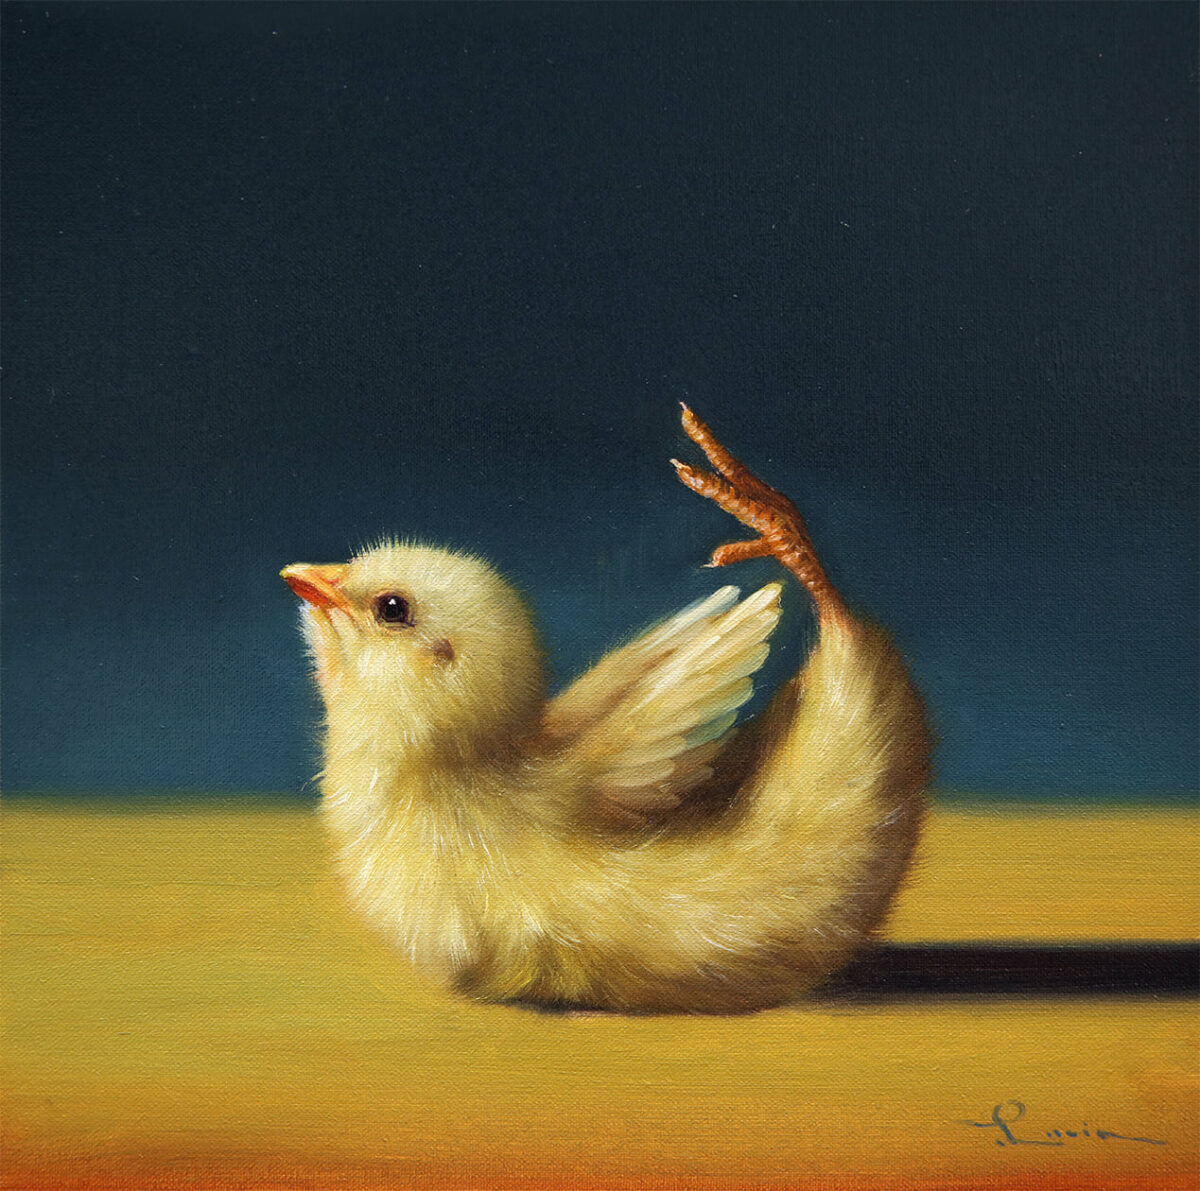 Lovely Paintings Of A Little Chicken Making Yoga Poses By Lucia Heffernan 15